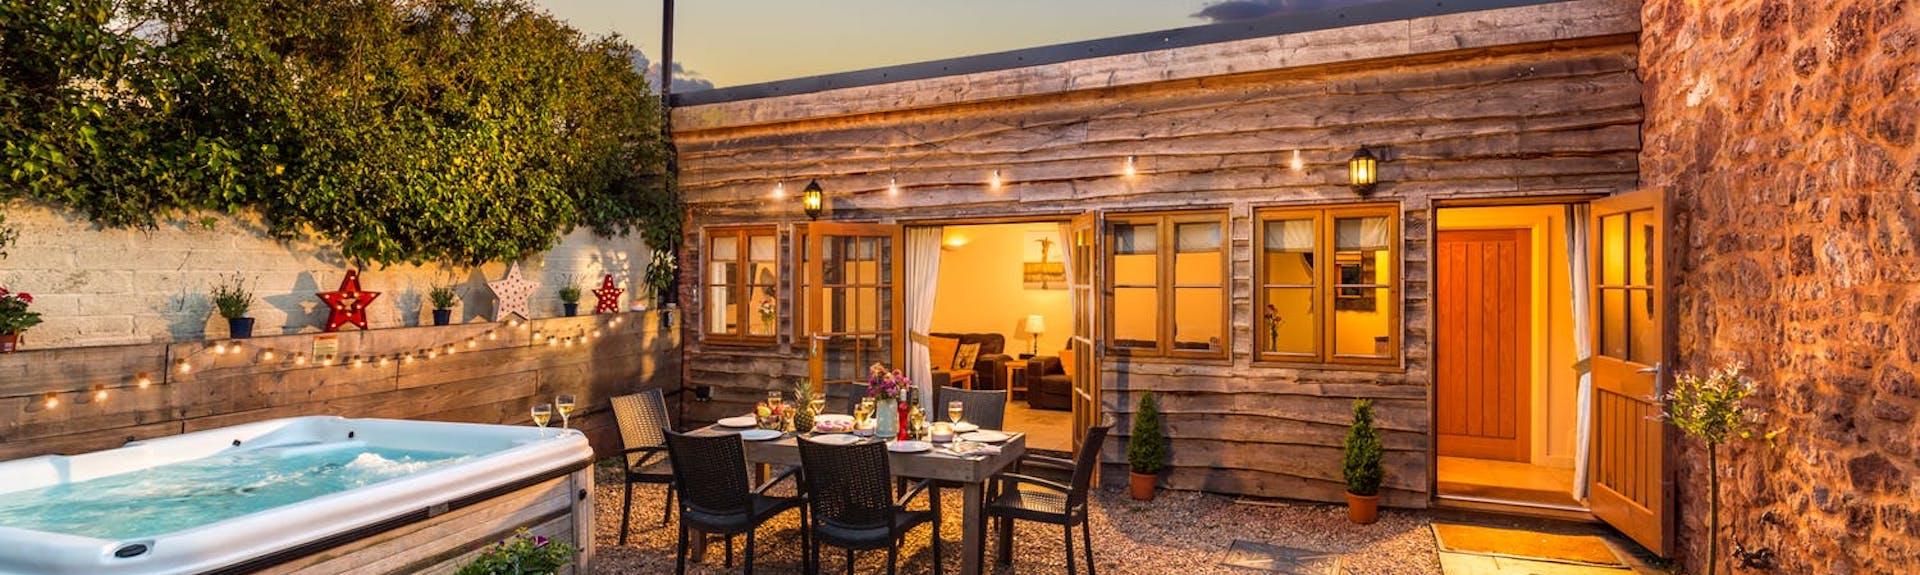 A wood-clad single storey holiday cottage at dusk overlooks a couryard with a table laid for dinner and a hot tub.